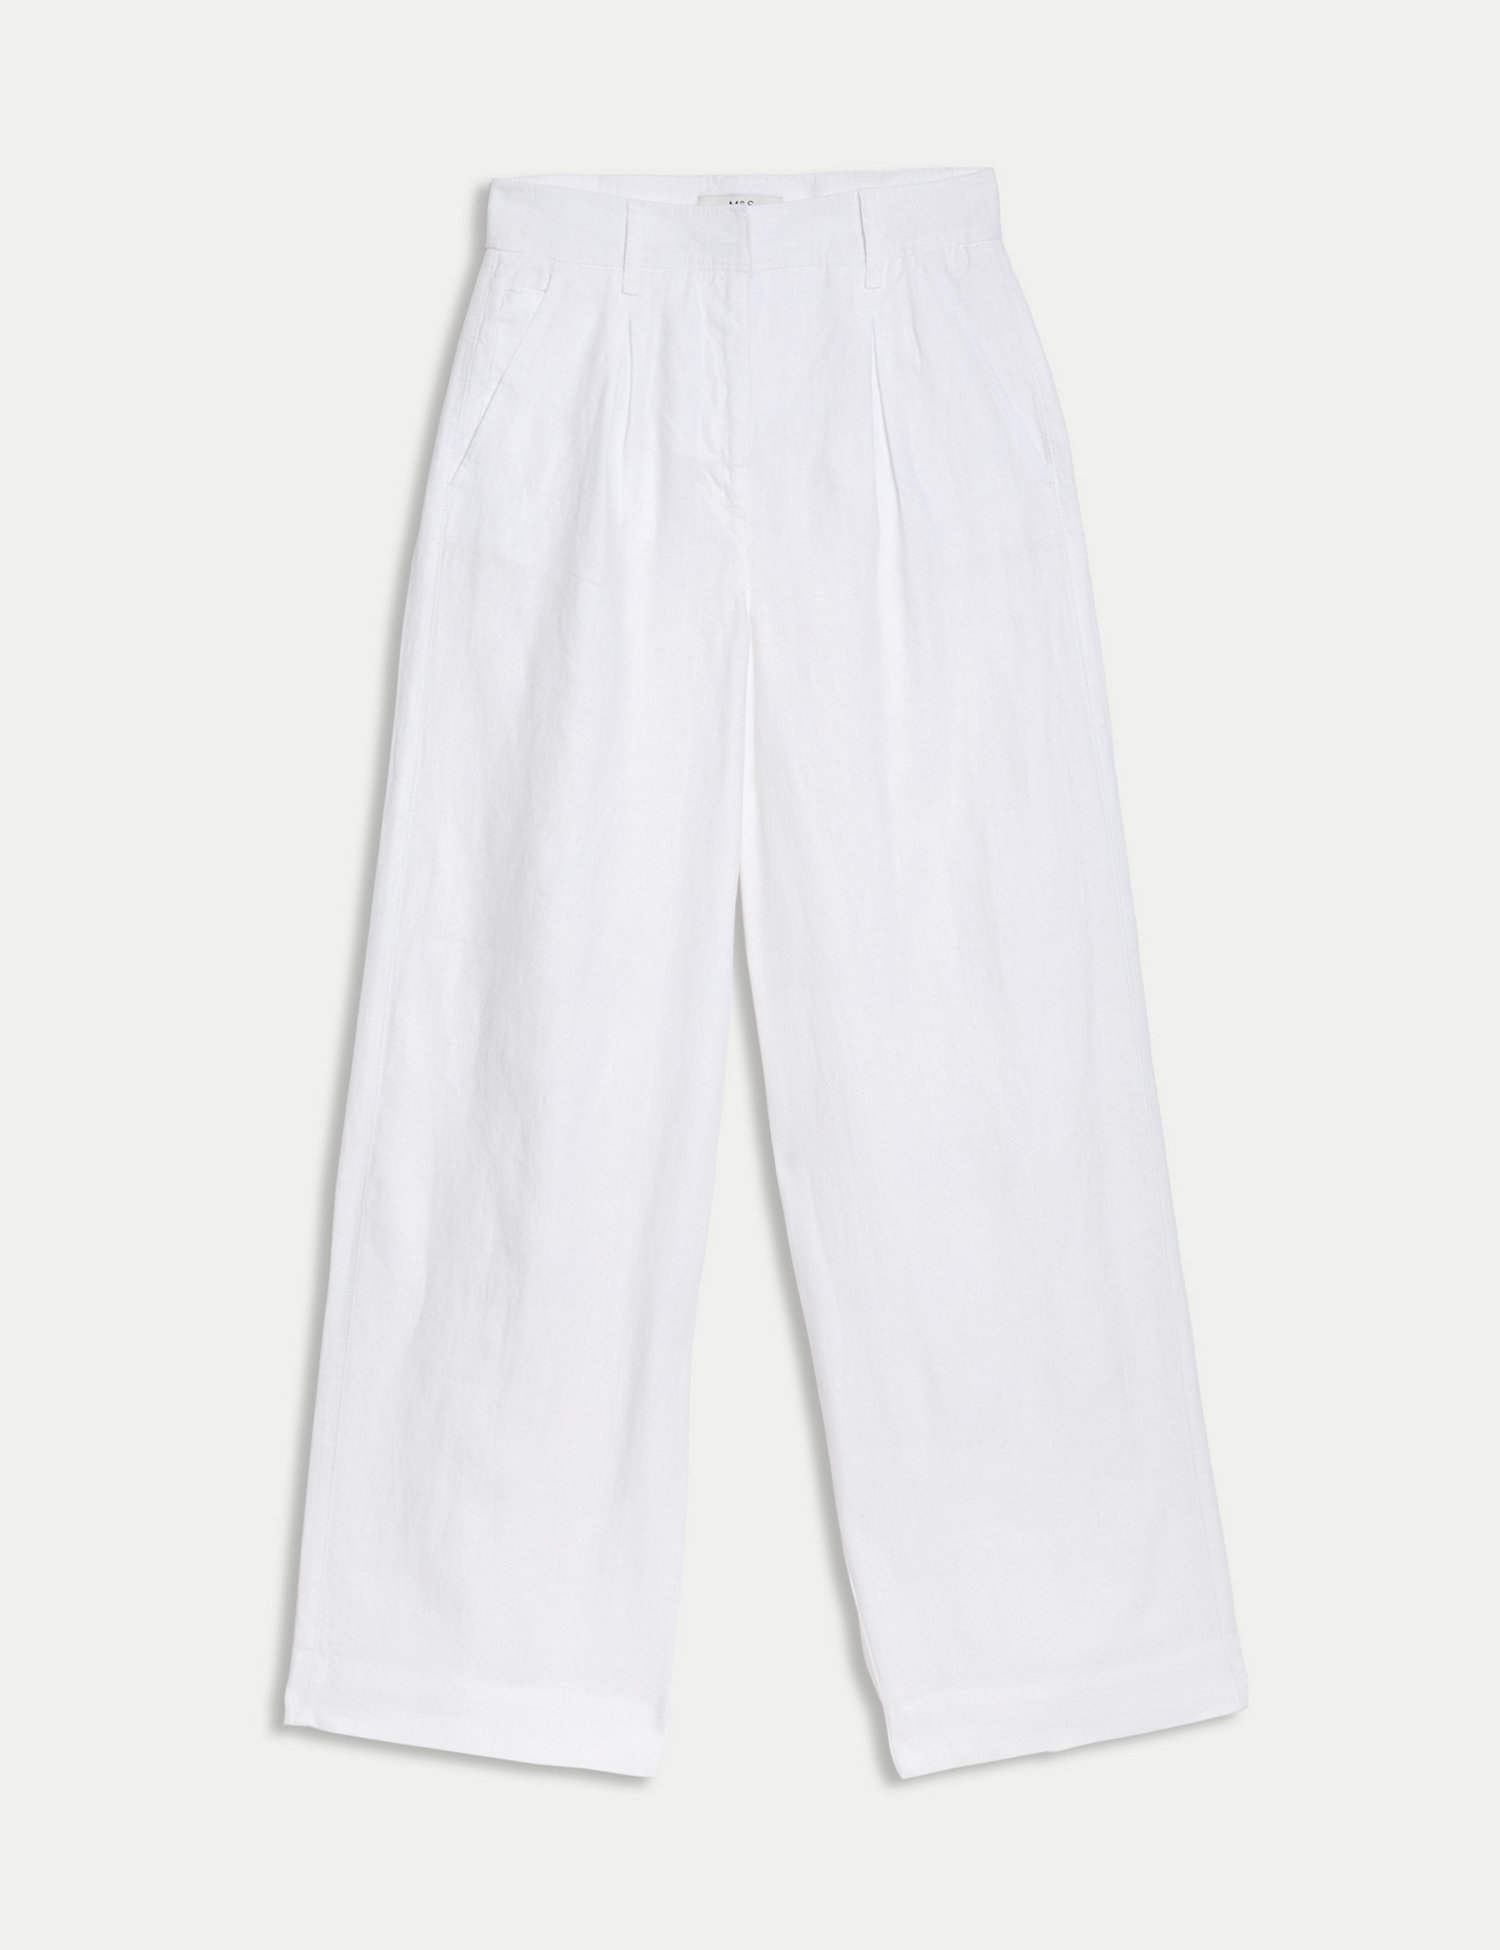 M&s trousers